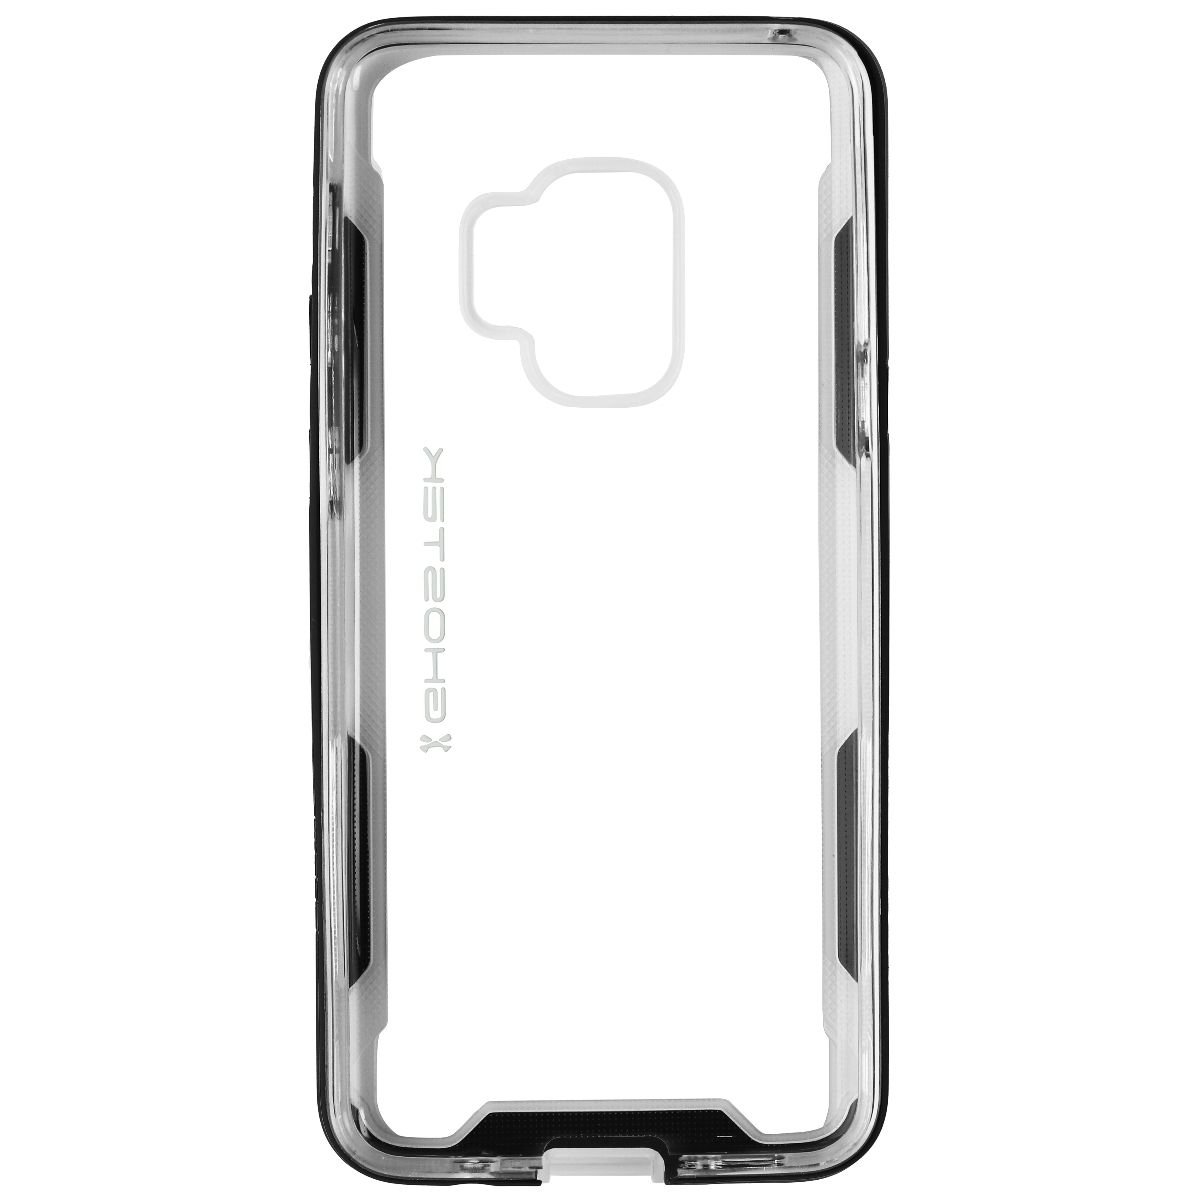 Ghostek Cloak Crystal Clear Protective Case For Galaxy S9 Plus - Black